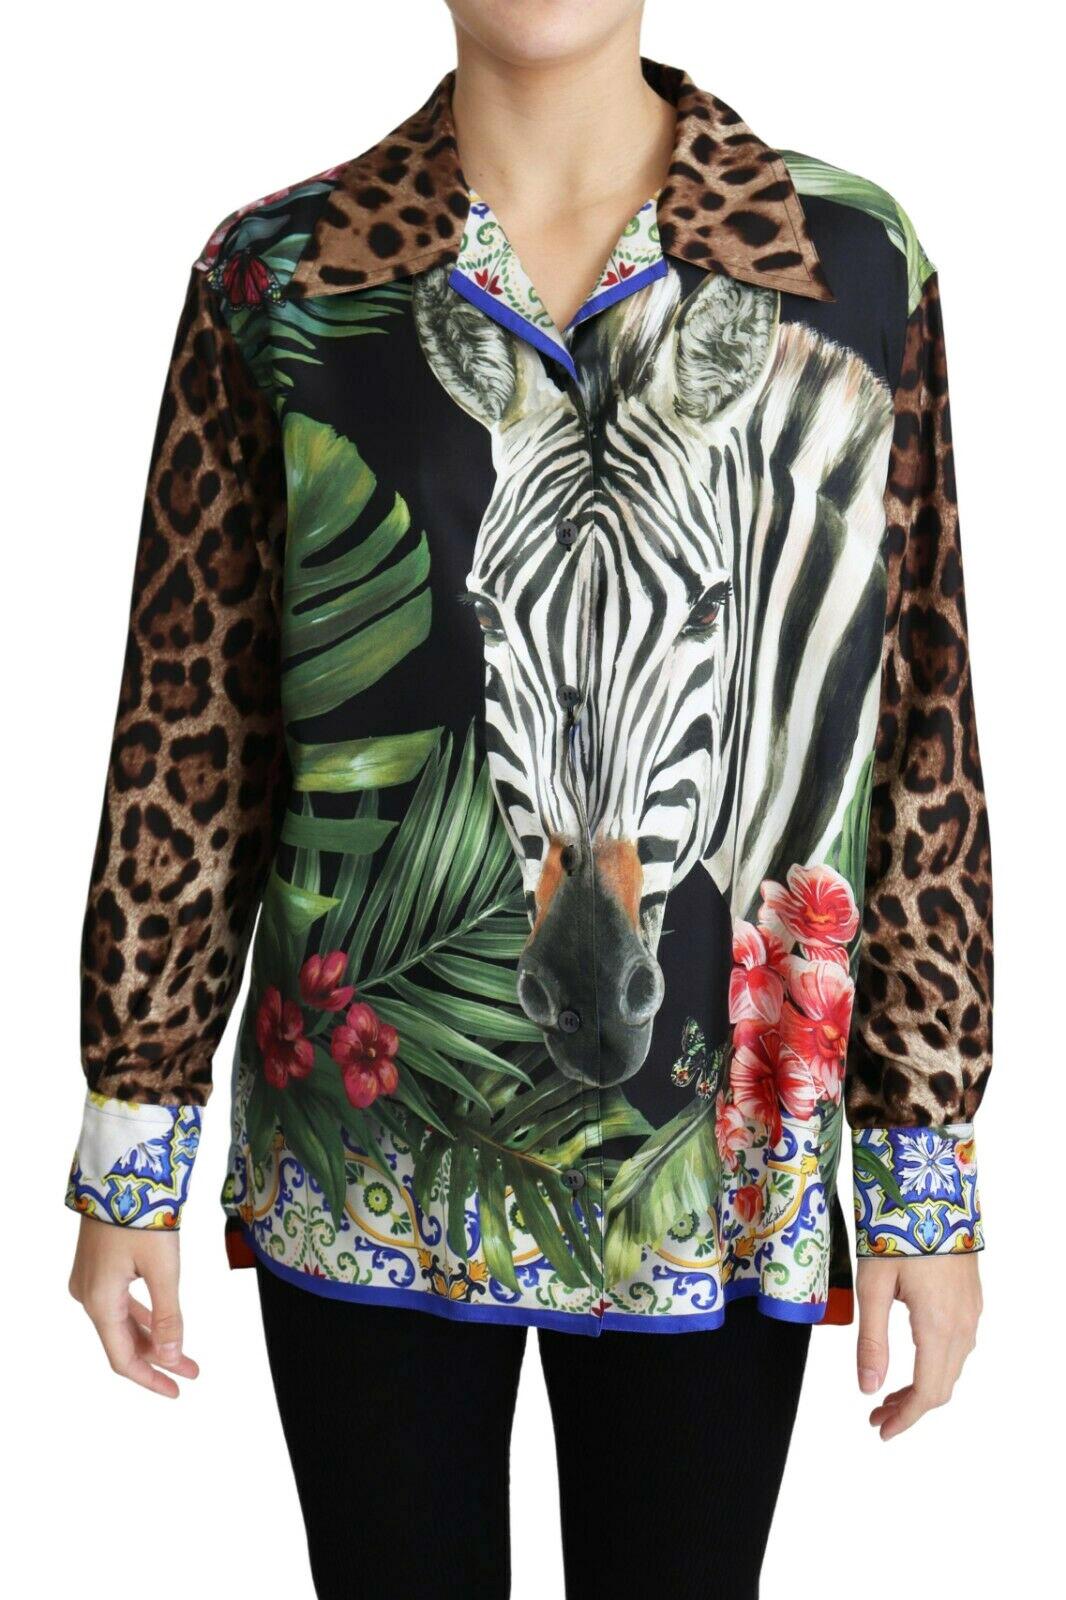 Gorgeous brand new with tags, 100% authentic Dolce & Gabbana oversized silk twill shirt-blouse, enriched with a mix of tropical and wild animal prints. 

Hawaiian collar, button front, straight hem with small side slits.


Style: Collared Oversized